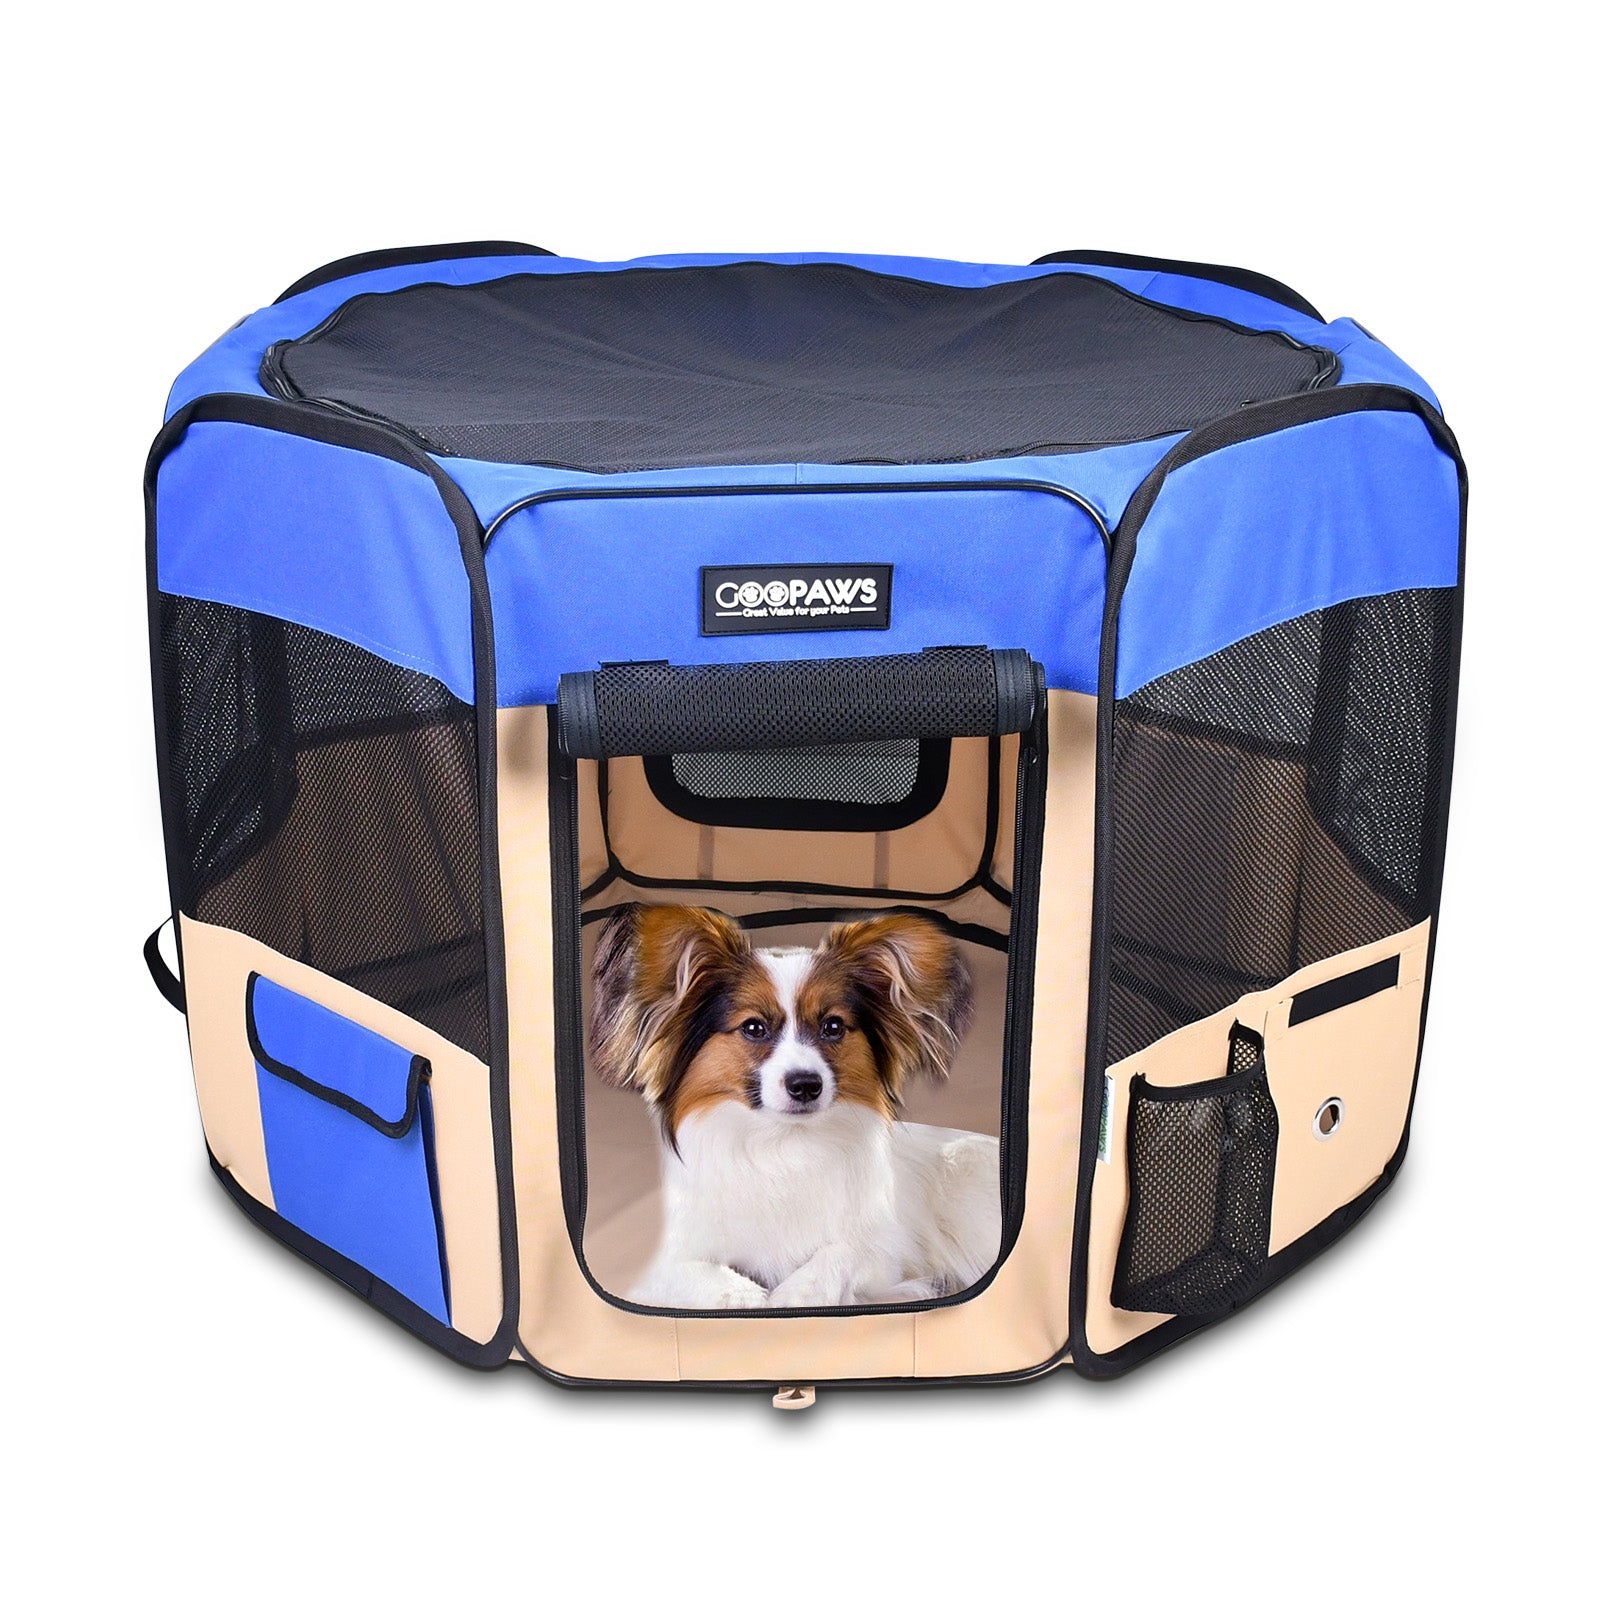 Jespet 2-Door Portable Soft-Sided Dog, Cat & Small Pet Exercise Playpen, Blue, 36''